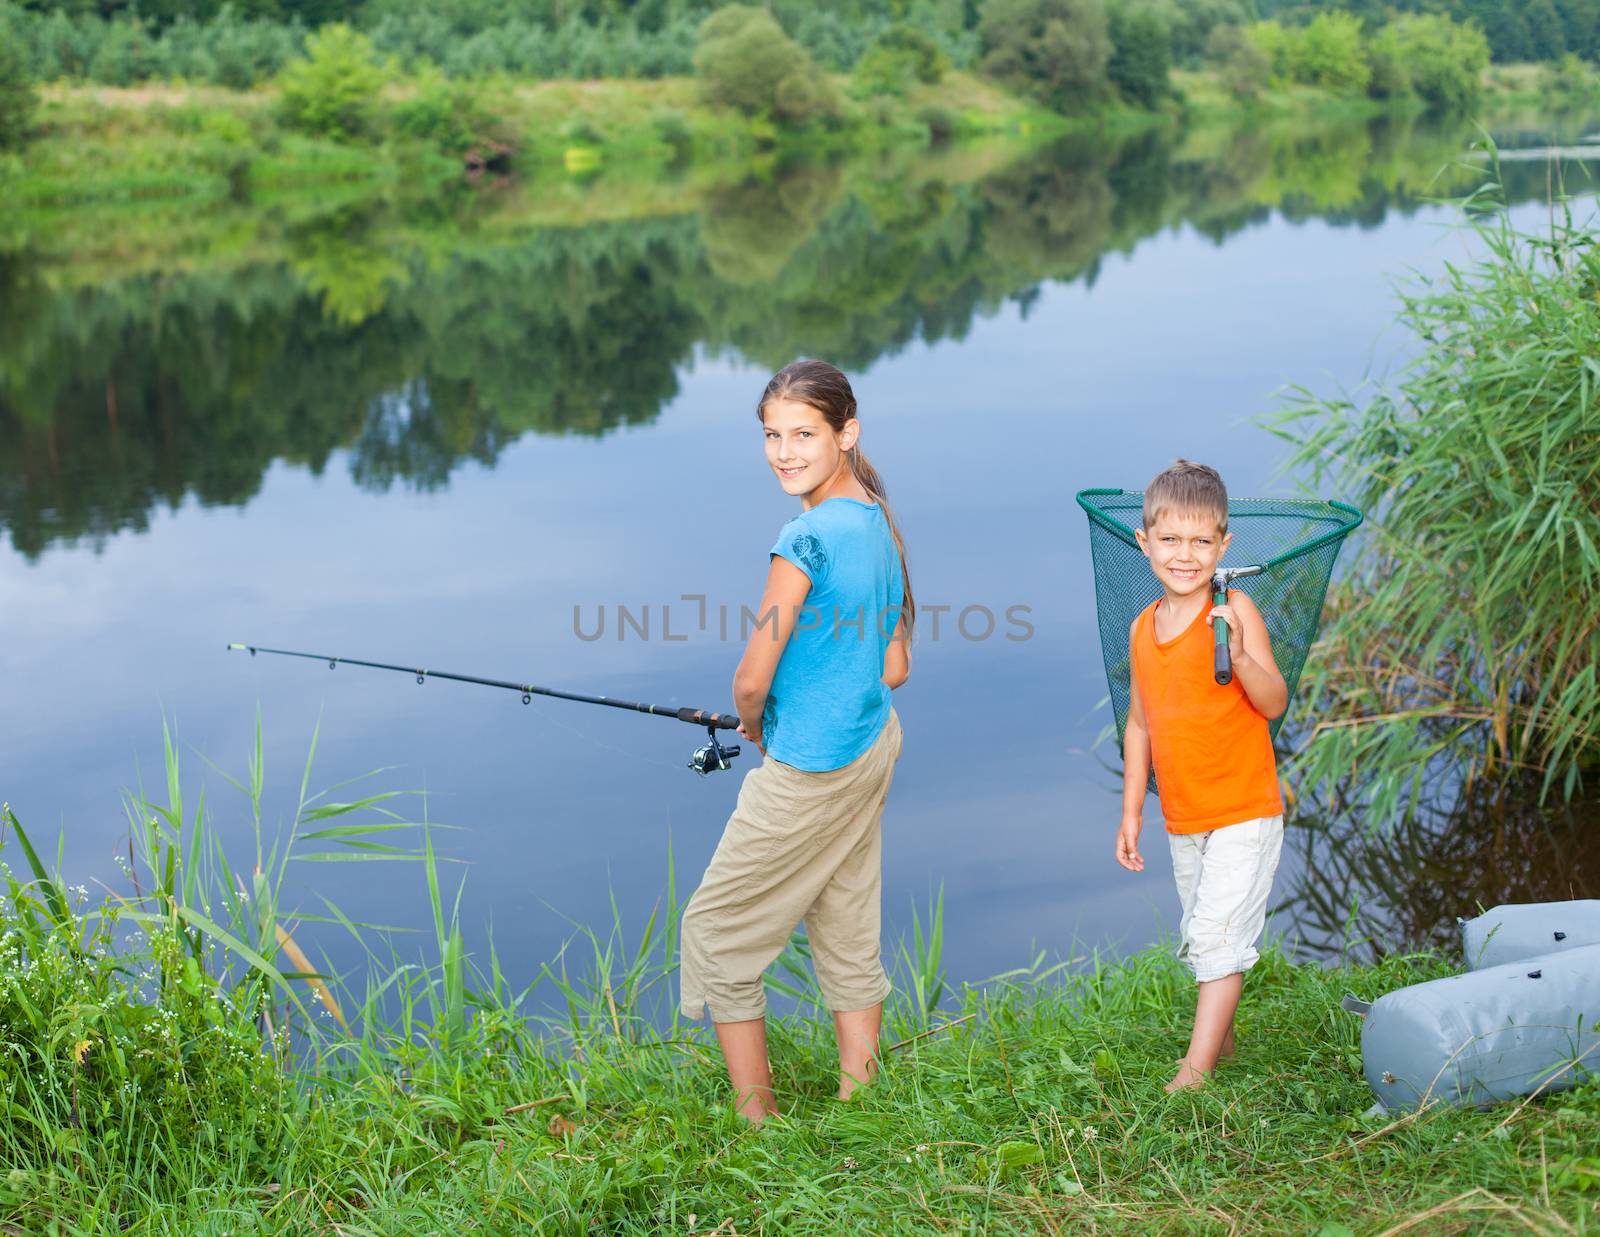 Summer vacation - Sister and brother fishing at the river